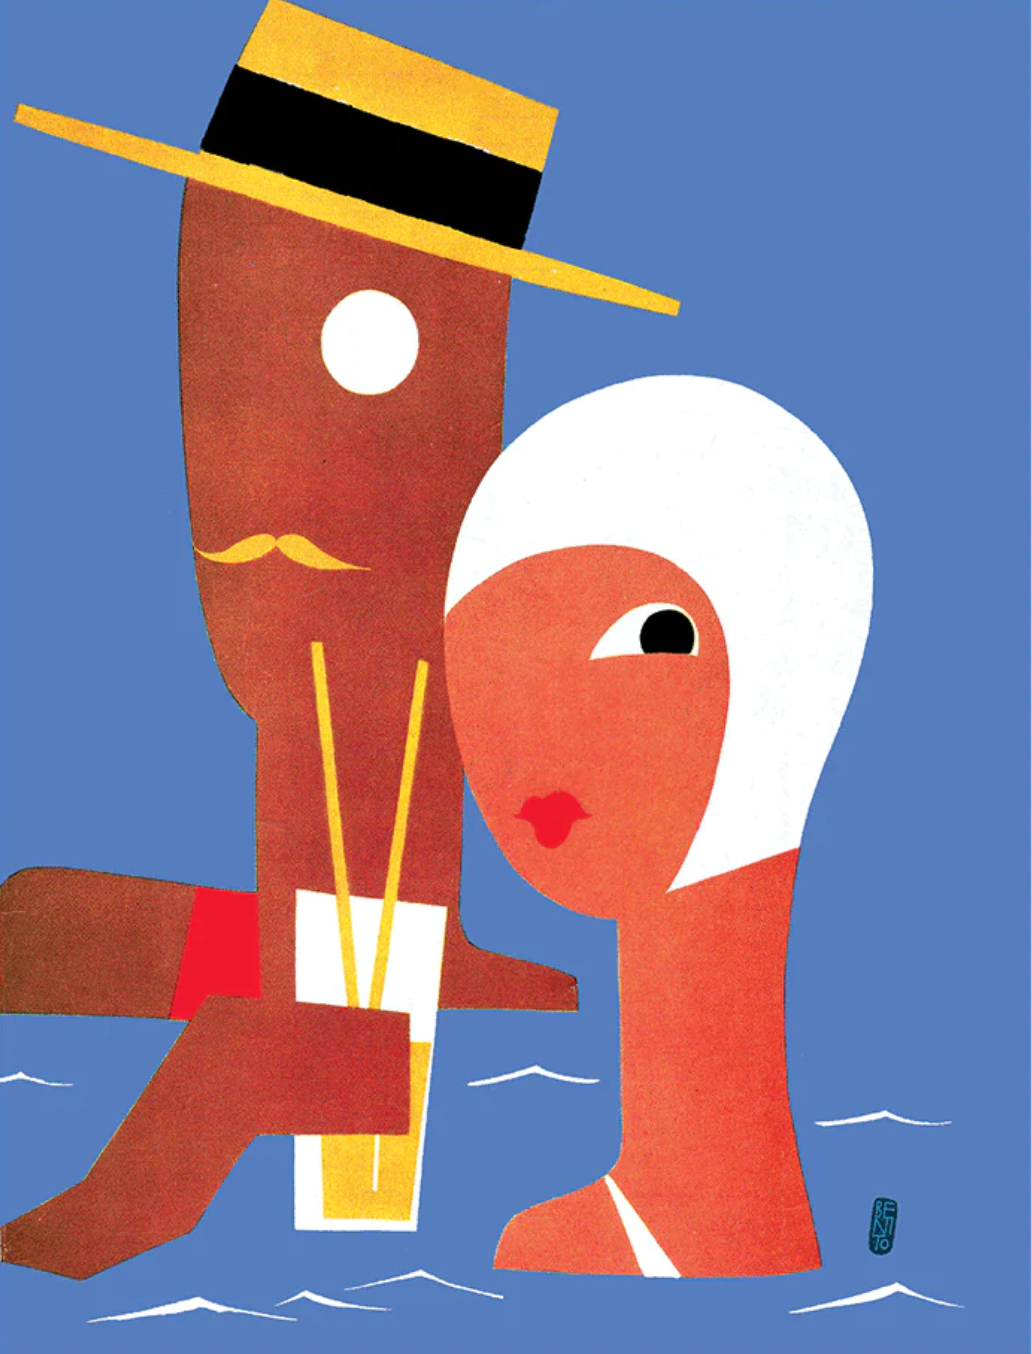 A geometric Art Deco-style illustration of a man and woman couple in the water